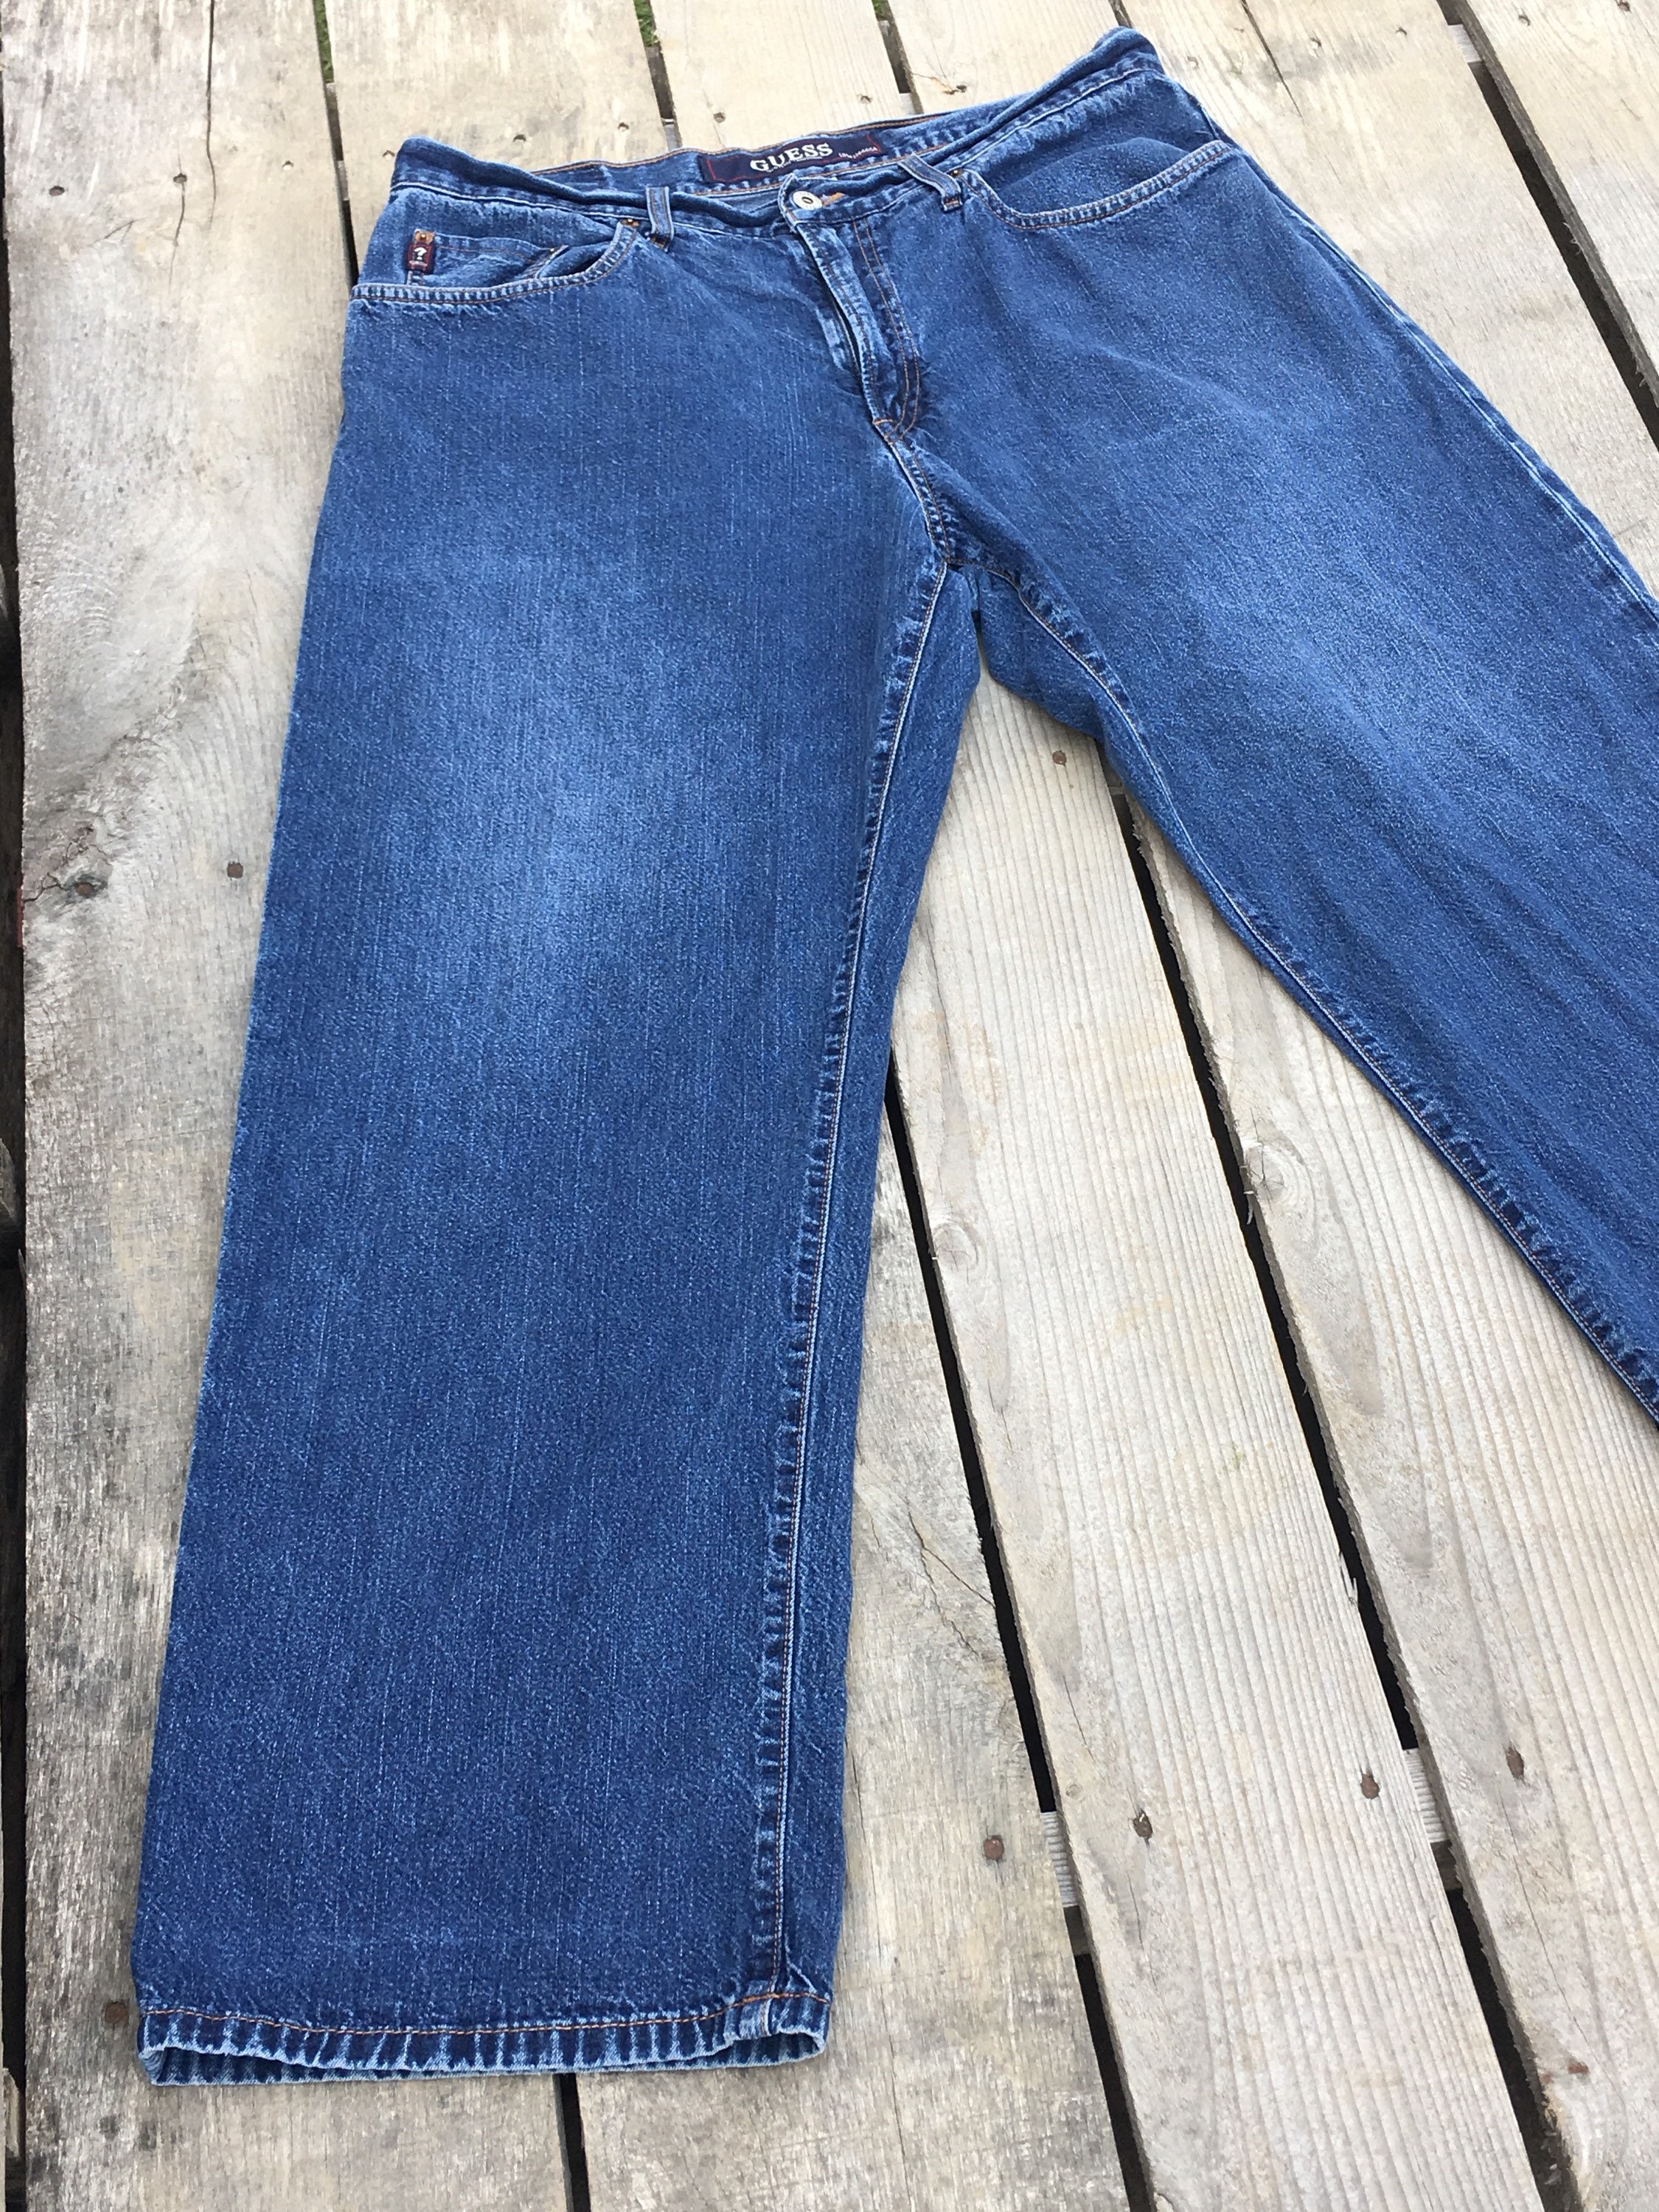 Vintage Guess Mom Jeans, Womens 35 Waist 29 Inseam Pants, Tall Rise ...